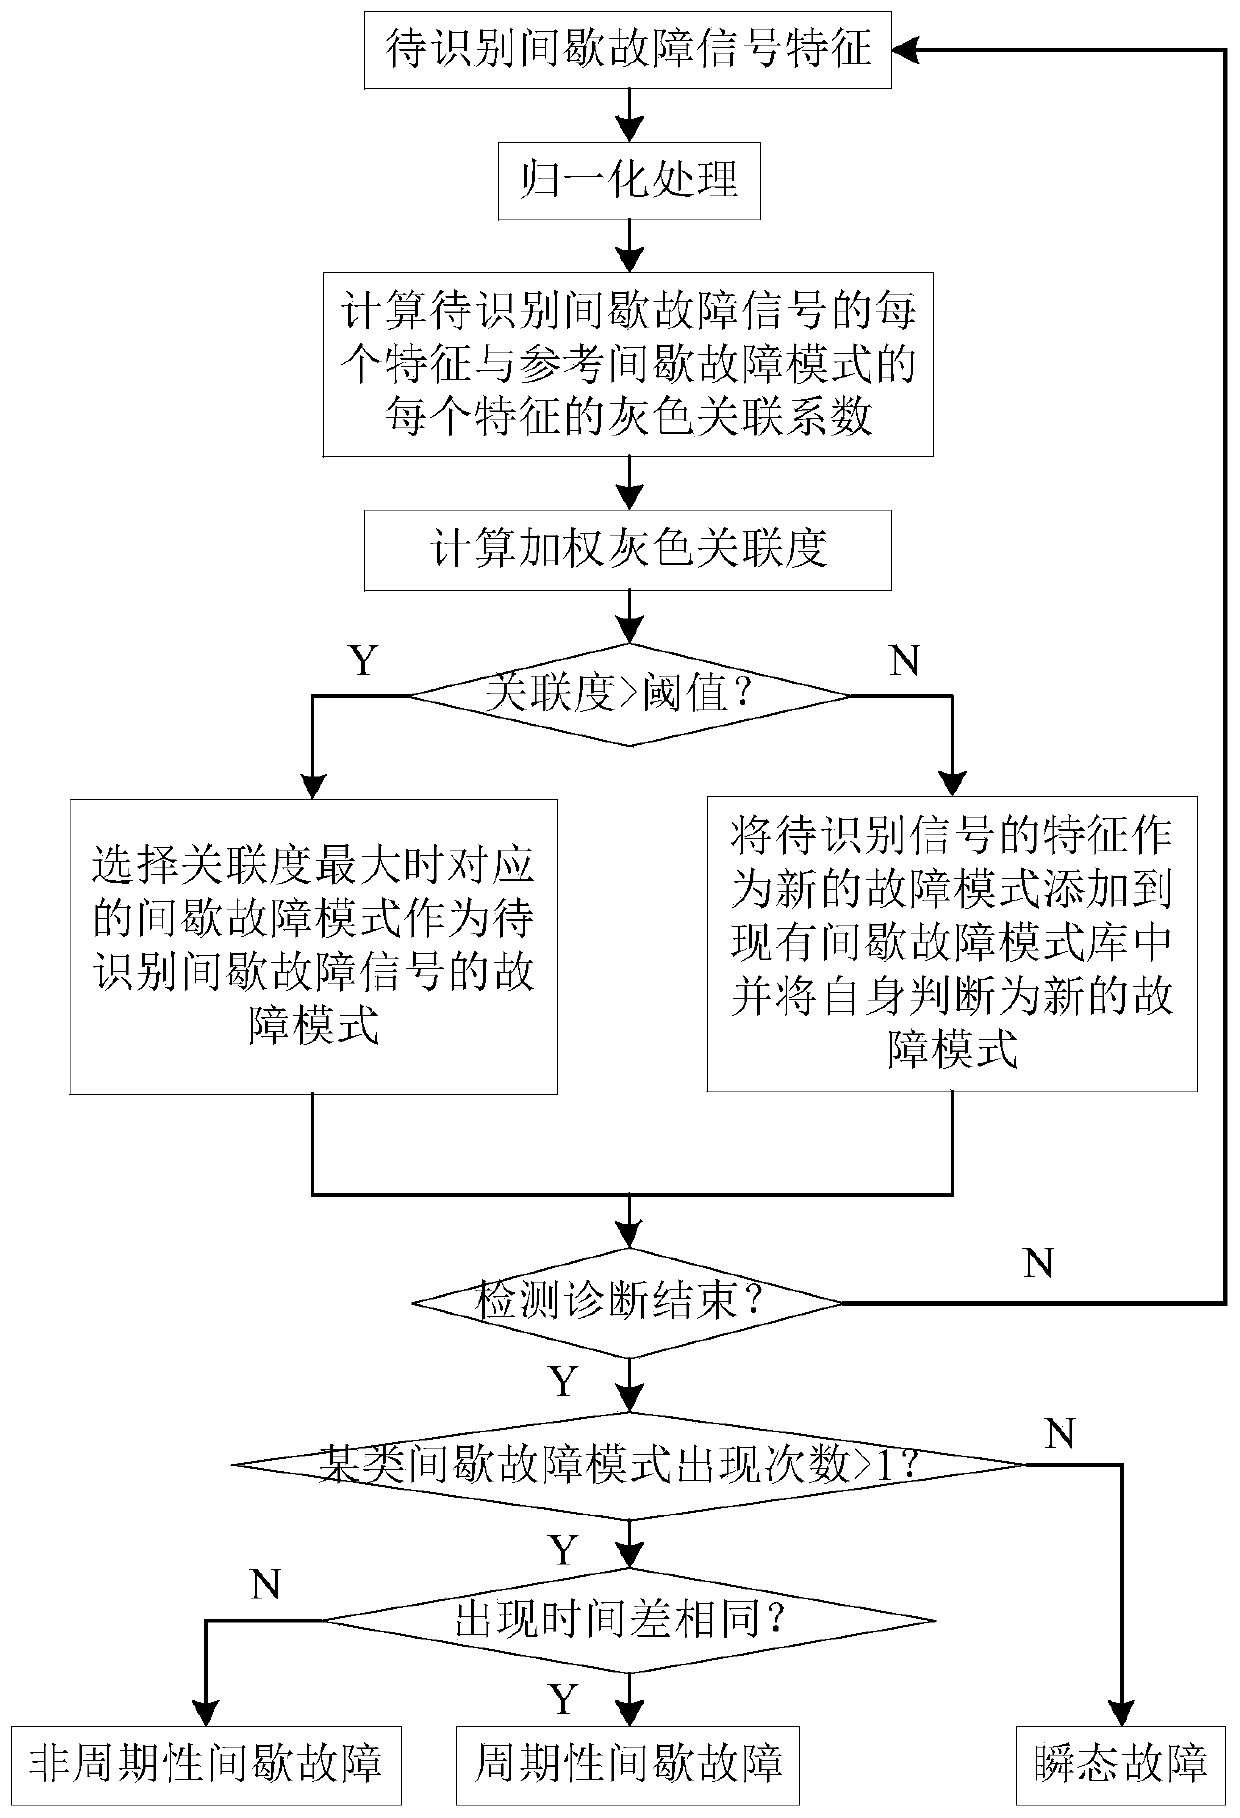 Online intermittent fault detection and diagnosis method